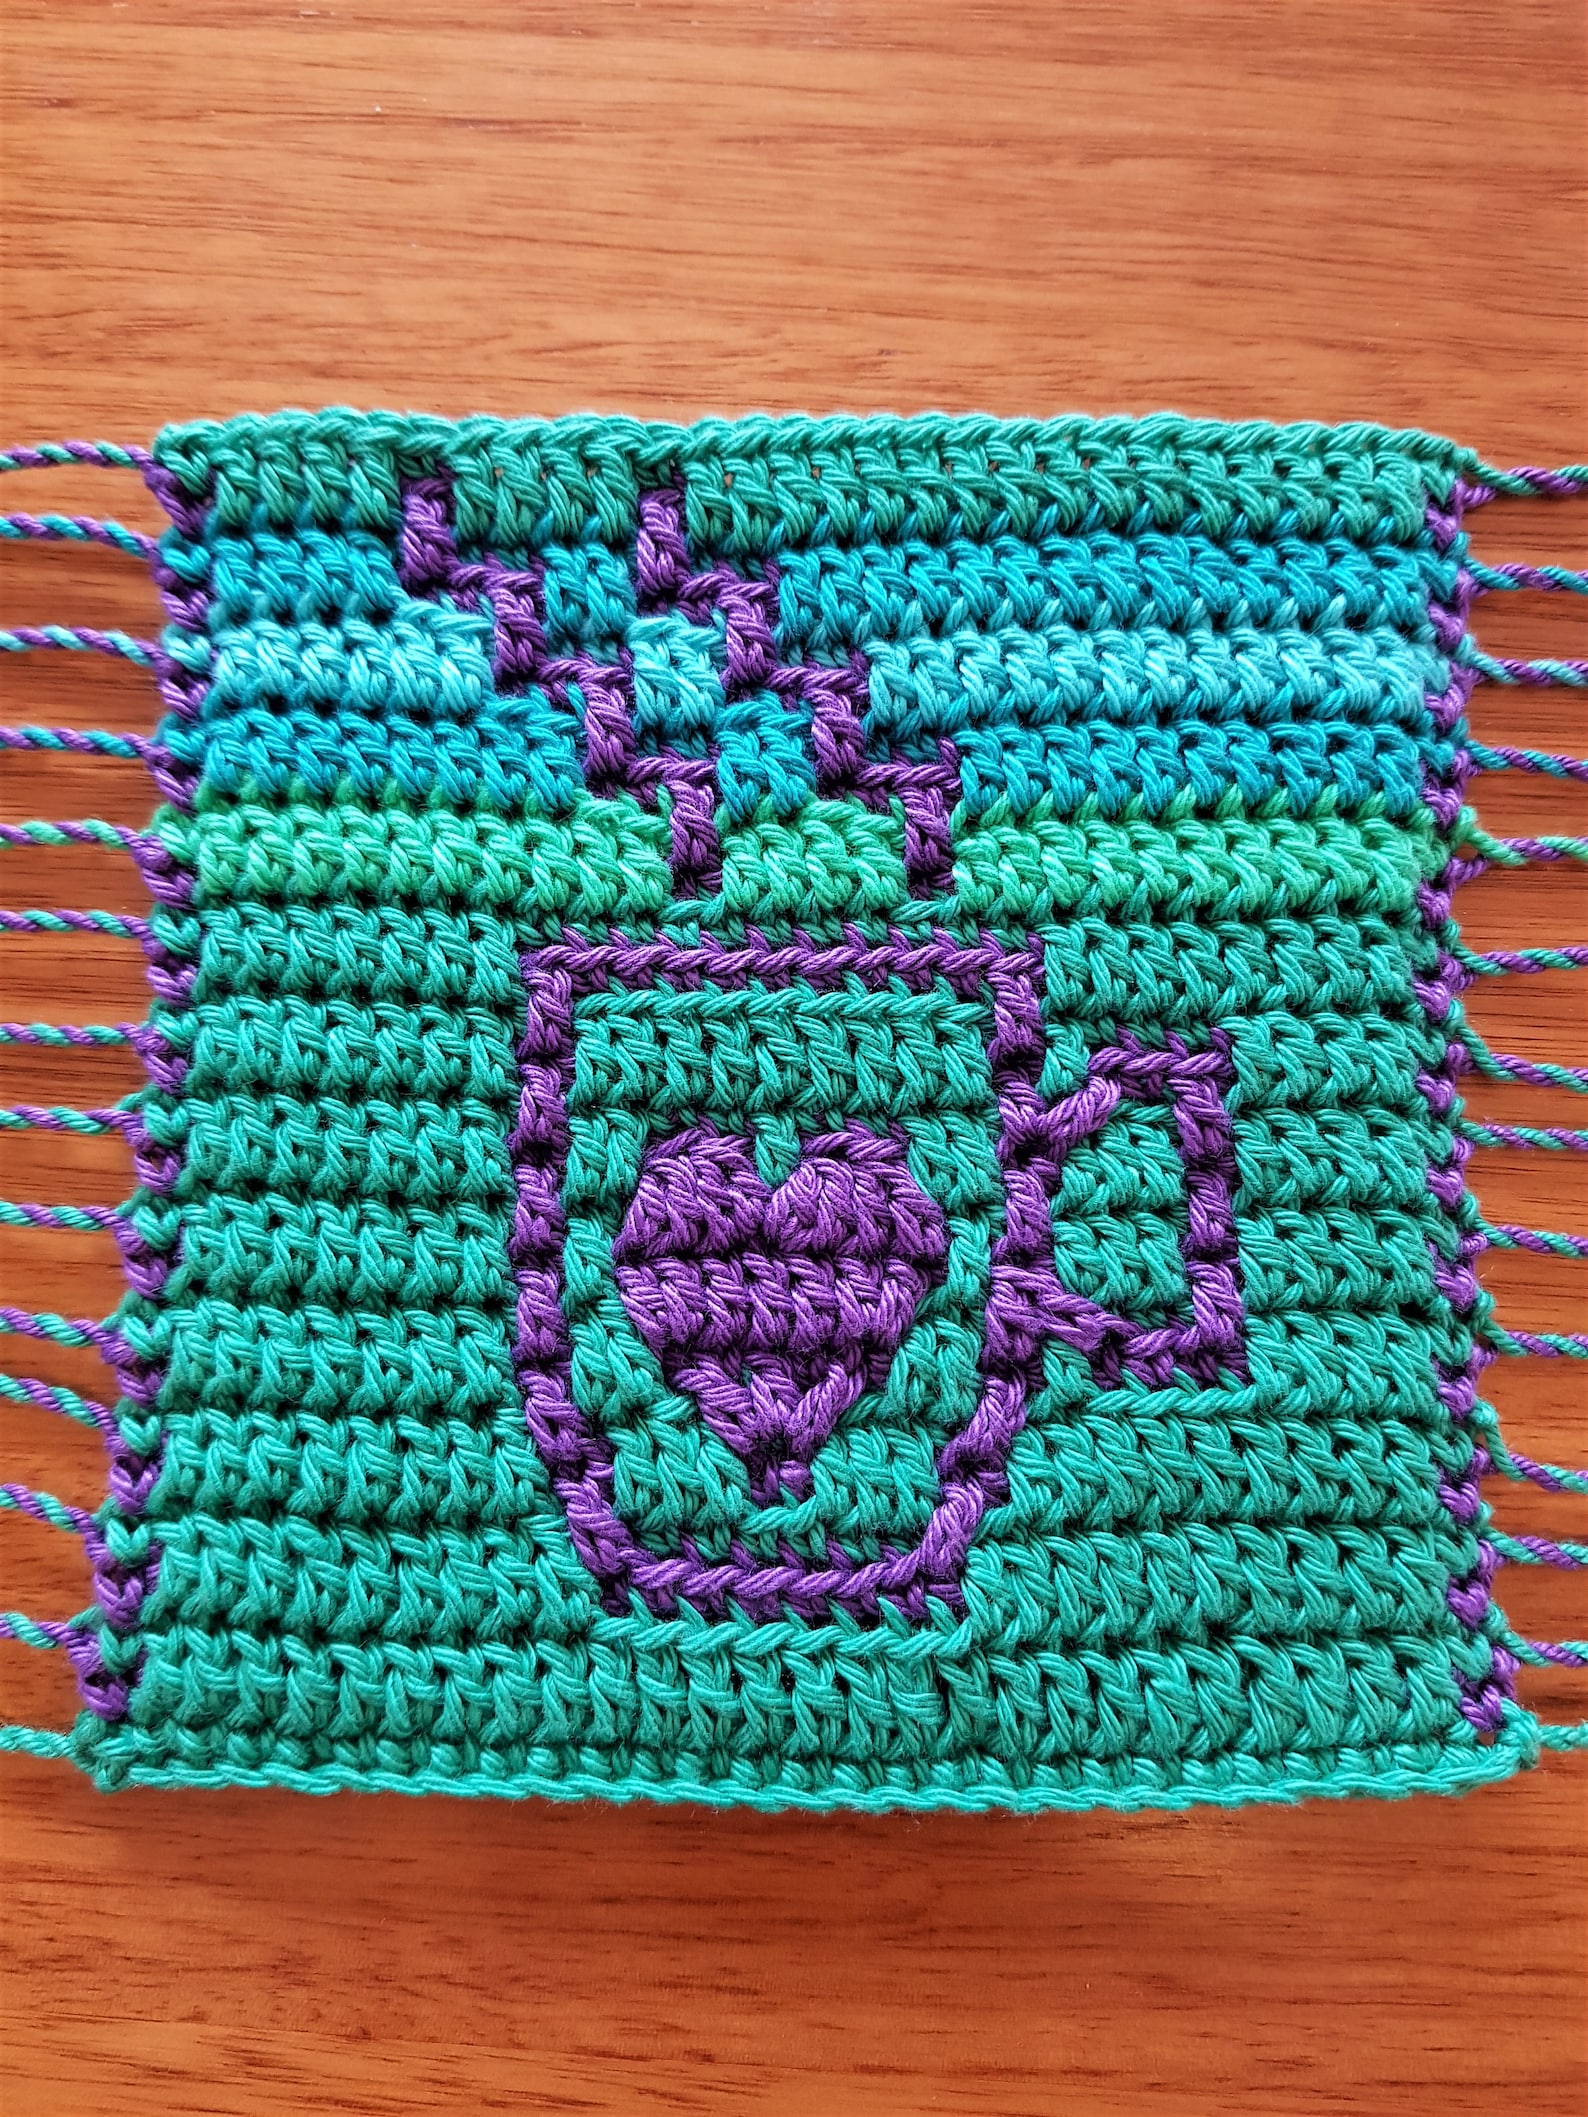 Mosaic Crochet Pattern Coffee Cup Mug Rug With Twisted Etsy